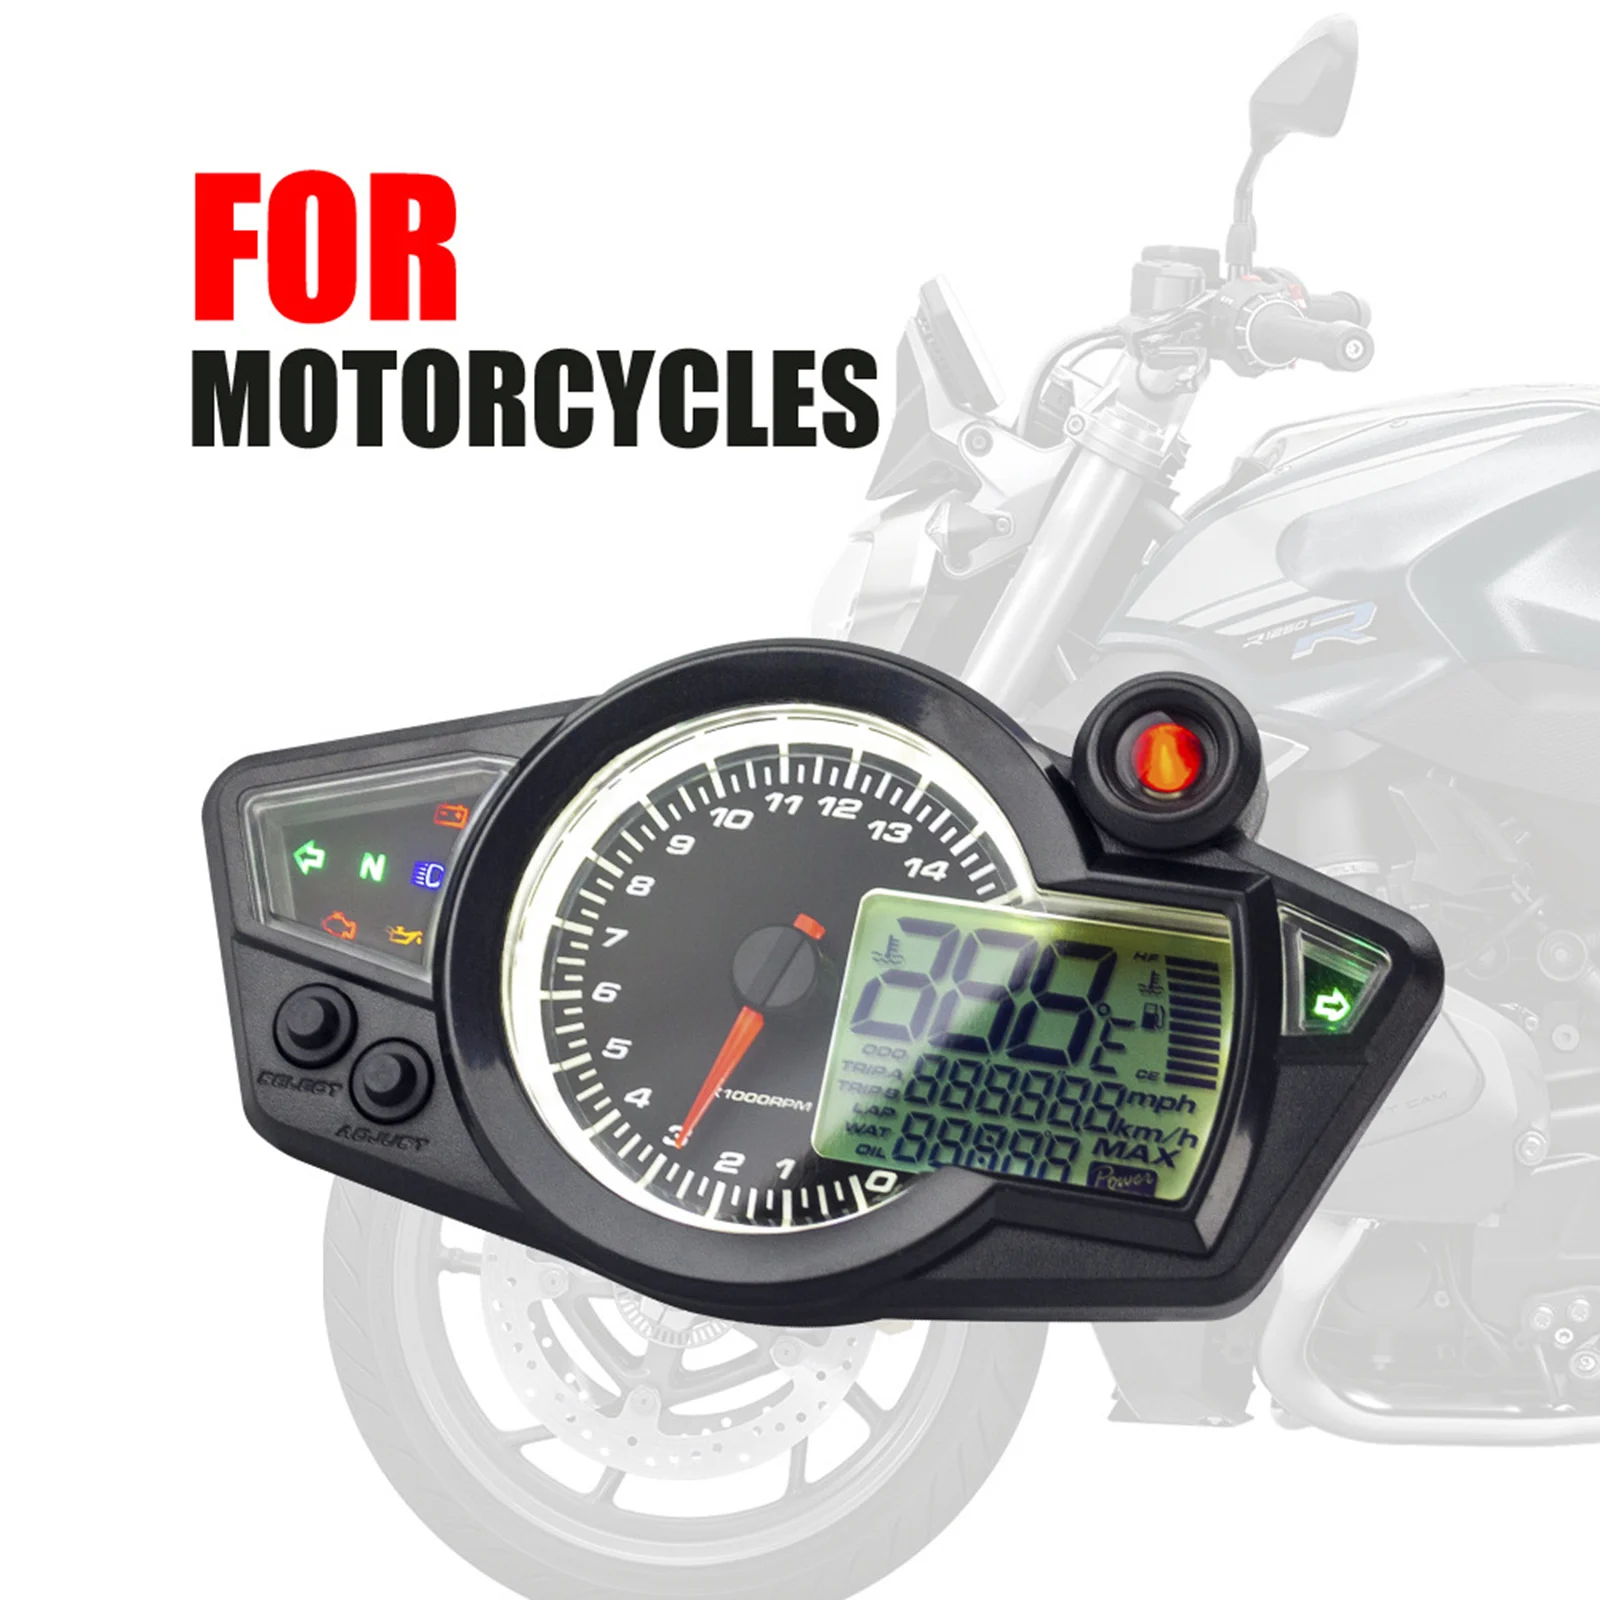 Motorcycle LCD Speedometer Gauge Universal Mechanical with Indicator Digital Gauge Fit for Motorbikes Supplies Riding Dashboard